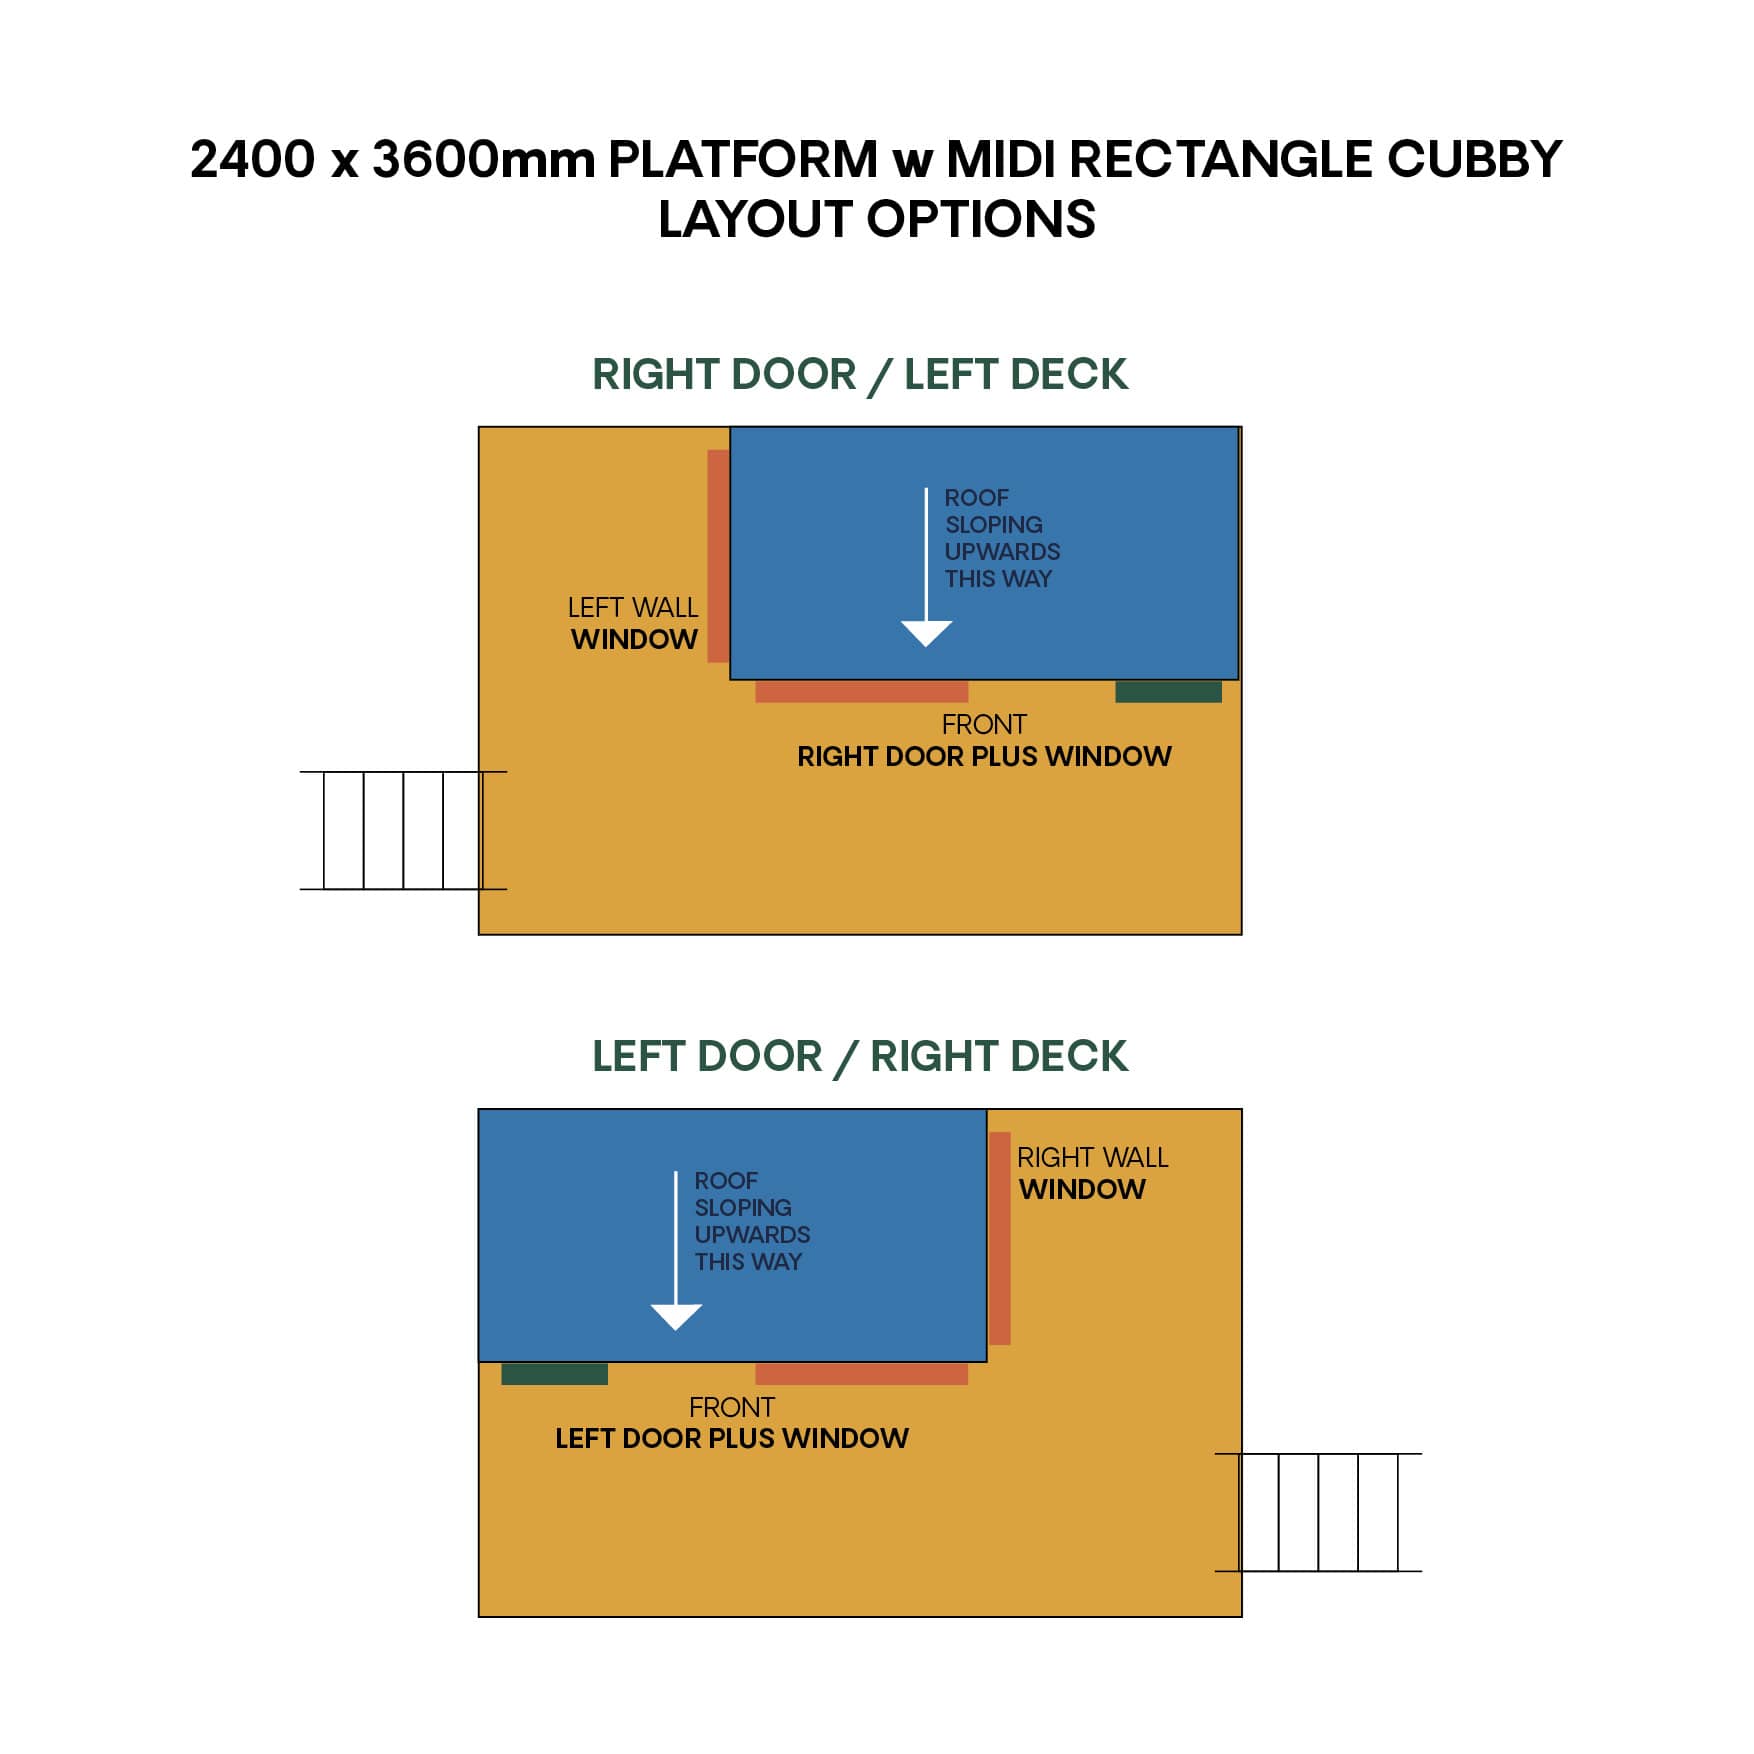 Layout diagram for 2400x3600 platform and treehouse